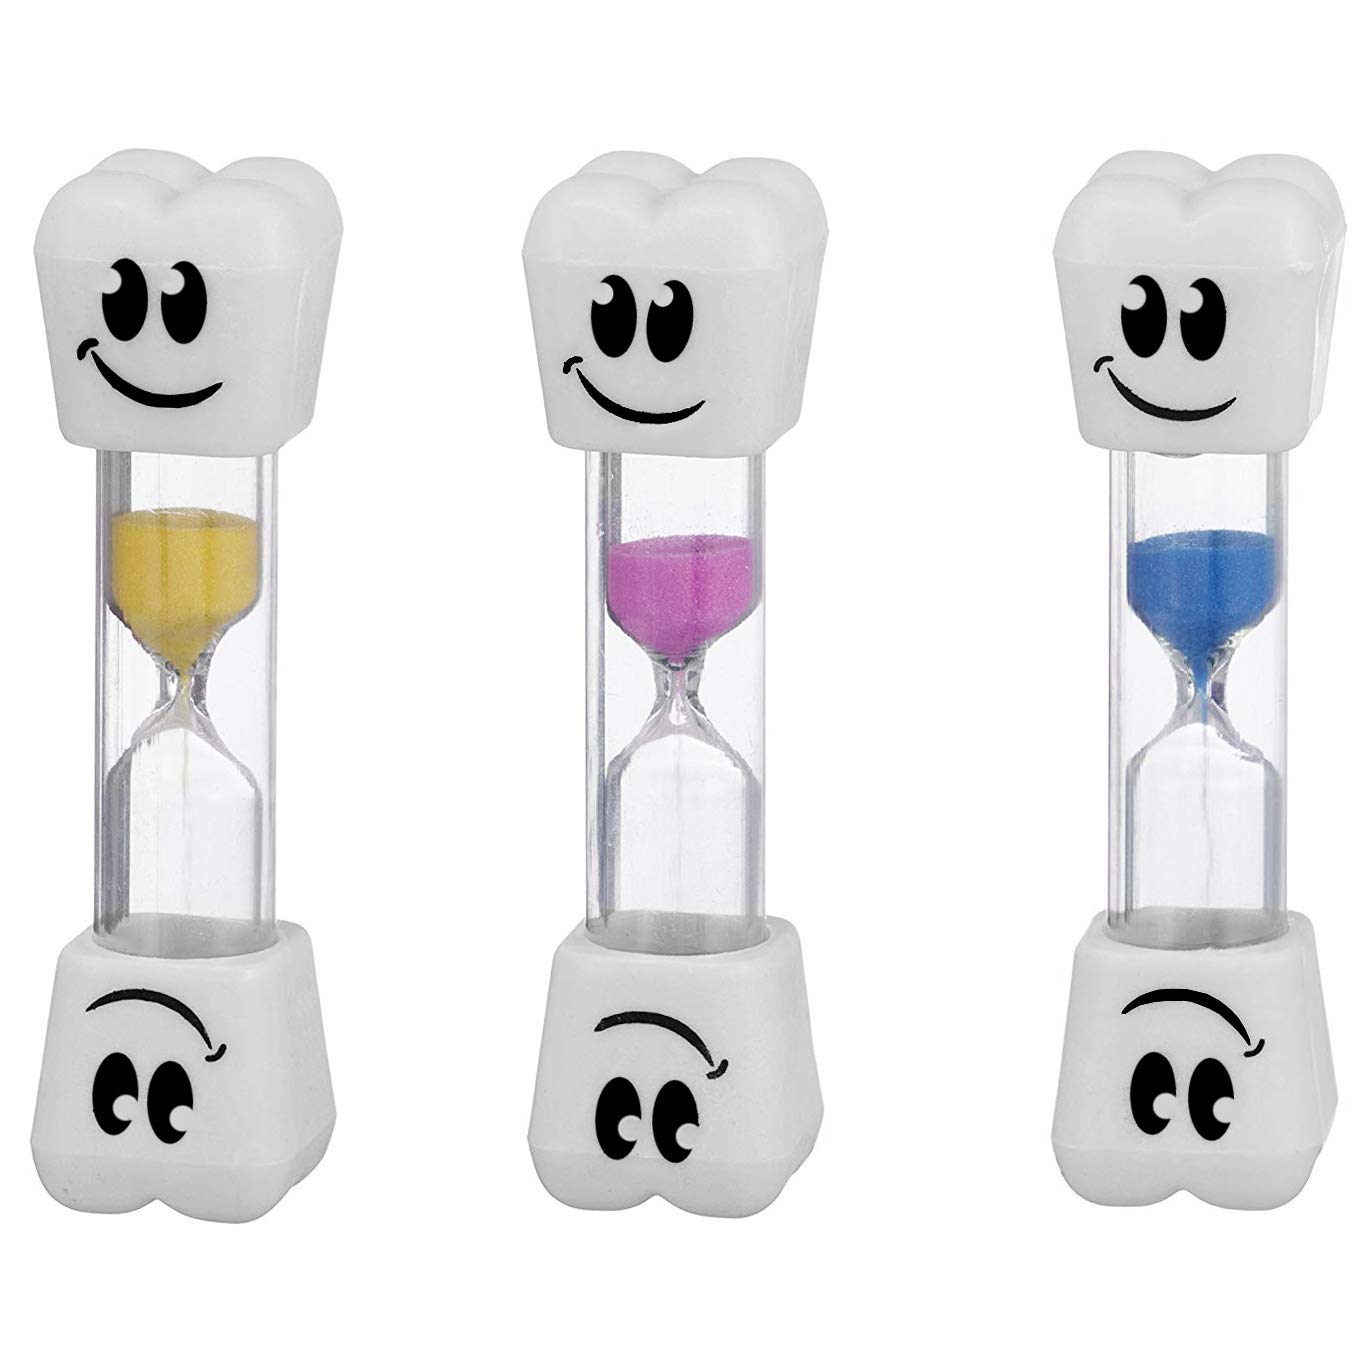 Rhode Island Novelty Smile Tooth 2 Minute Sand Timer Assorted Colors (2 Pack)